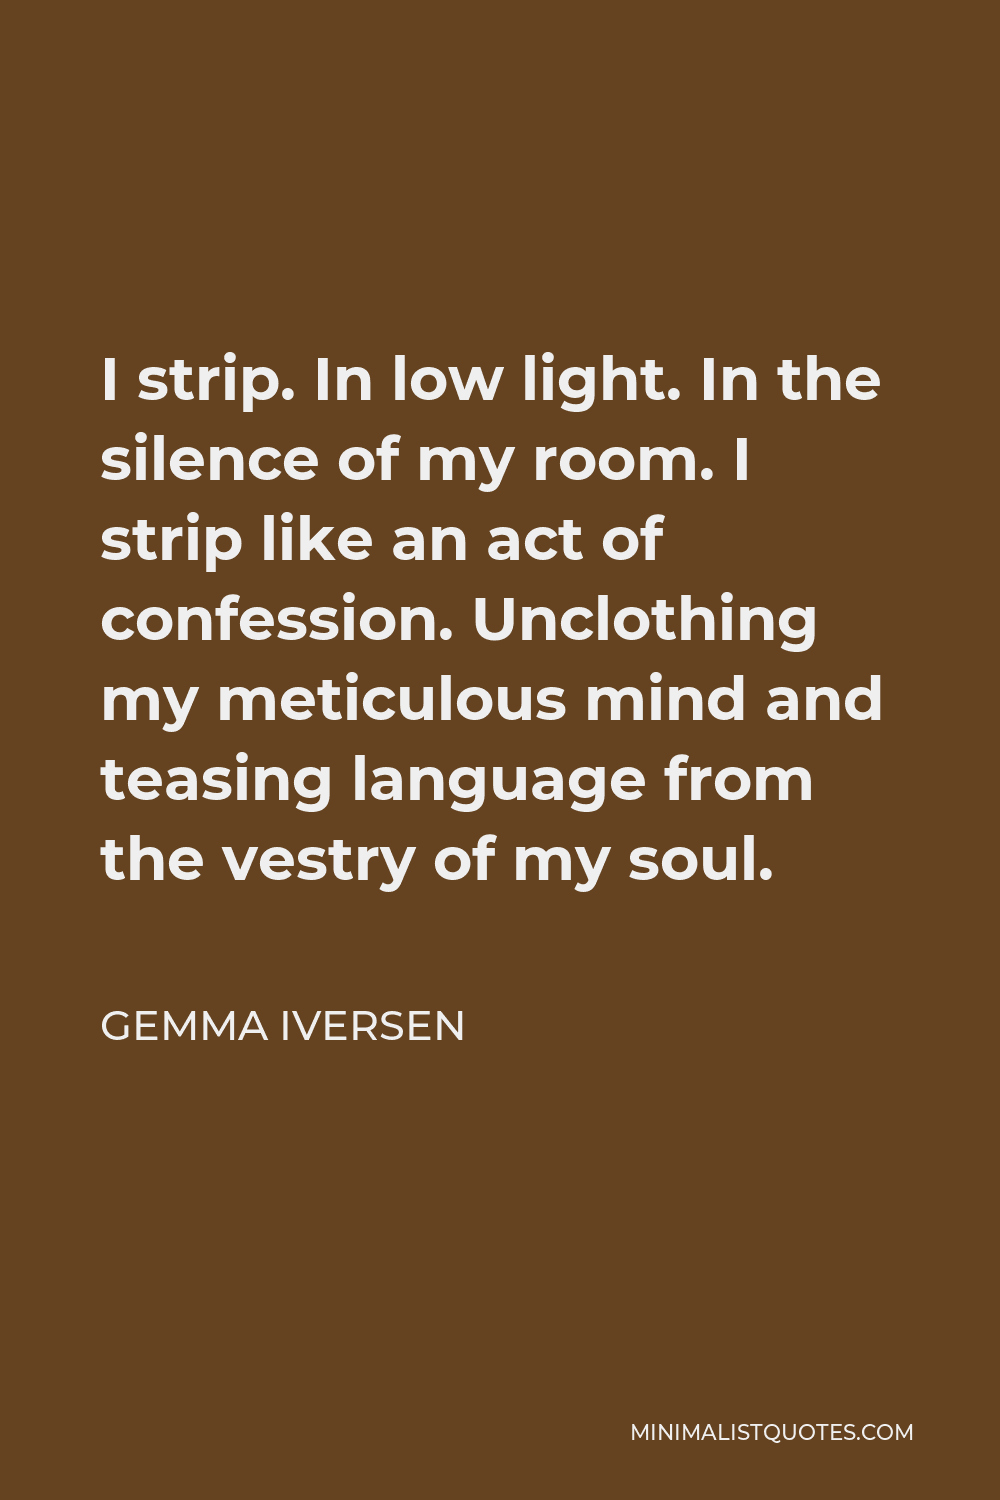 Gemma Iversen Quote - I strip. In low light. In the silence of my room. I strip like an act of confession. Unclothing my meticulous mind and teasing language from the vestry of my soul.